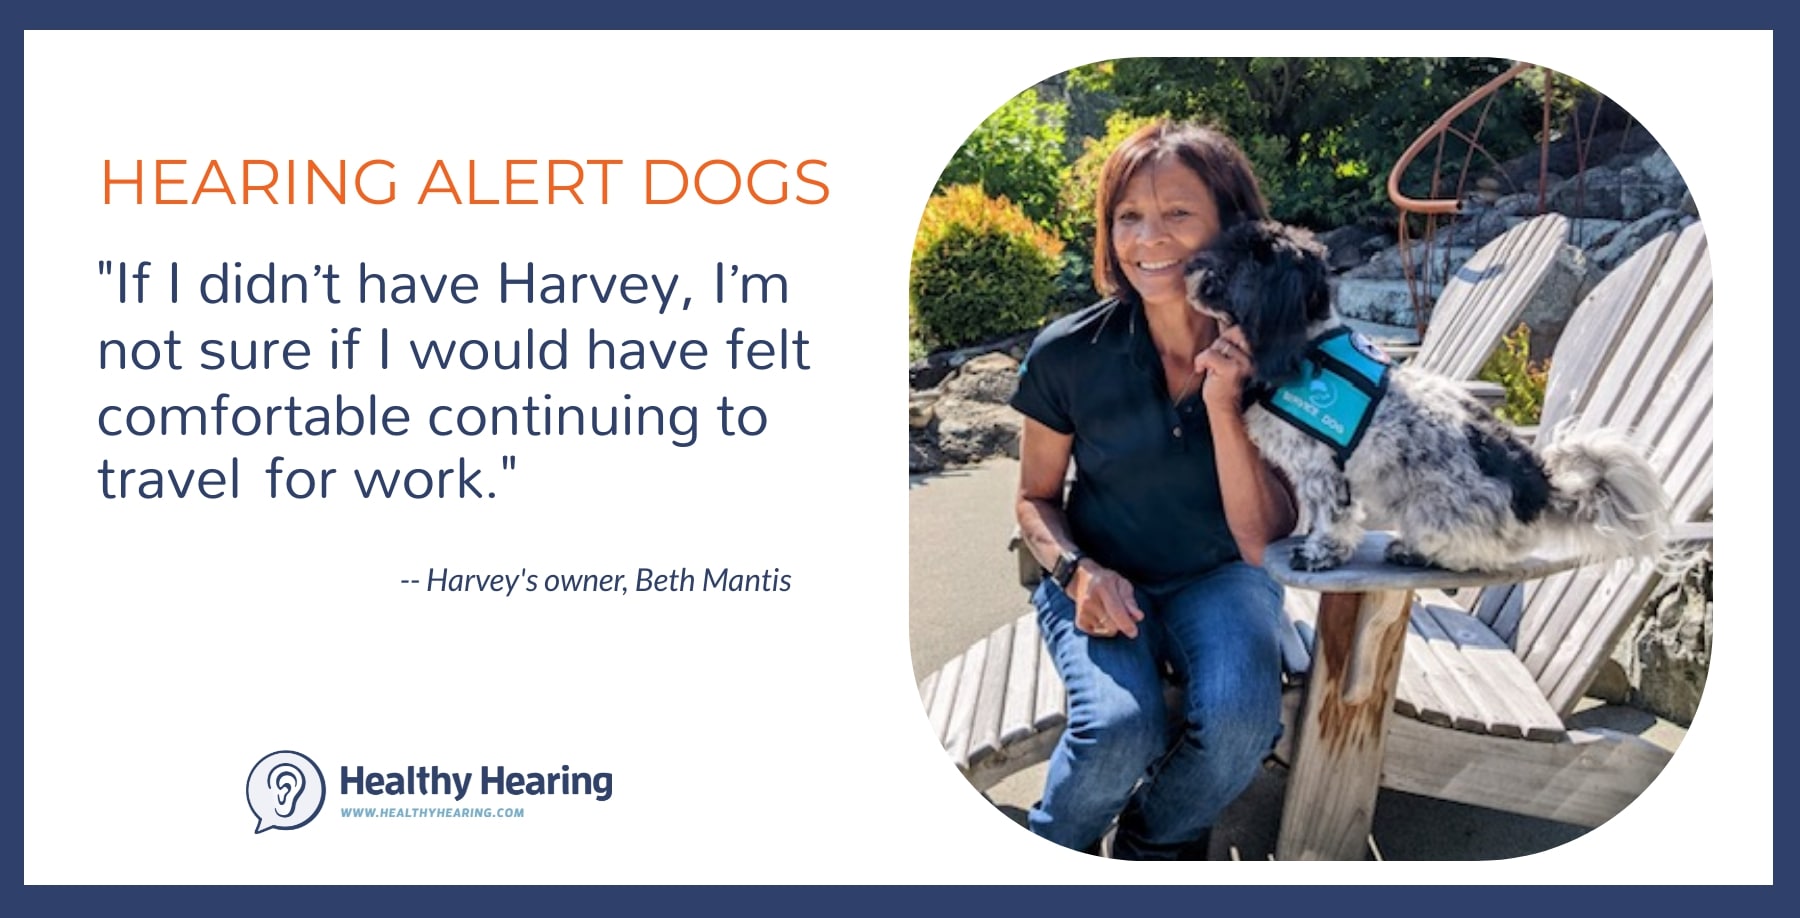 "If I didn’t have Harvey, I’m not sure if I would have felt comfortable continuing to travel for work."